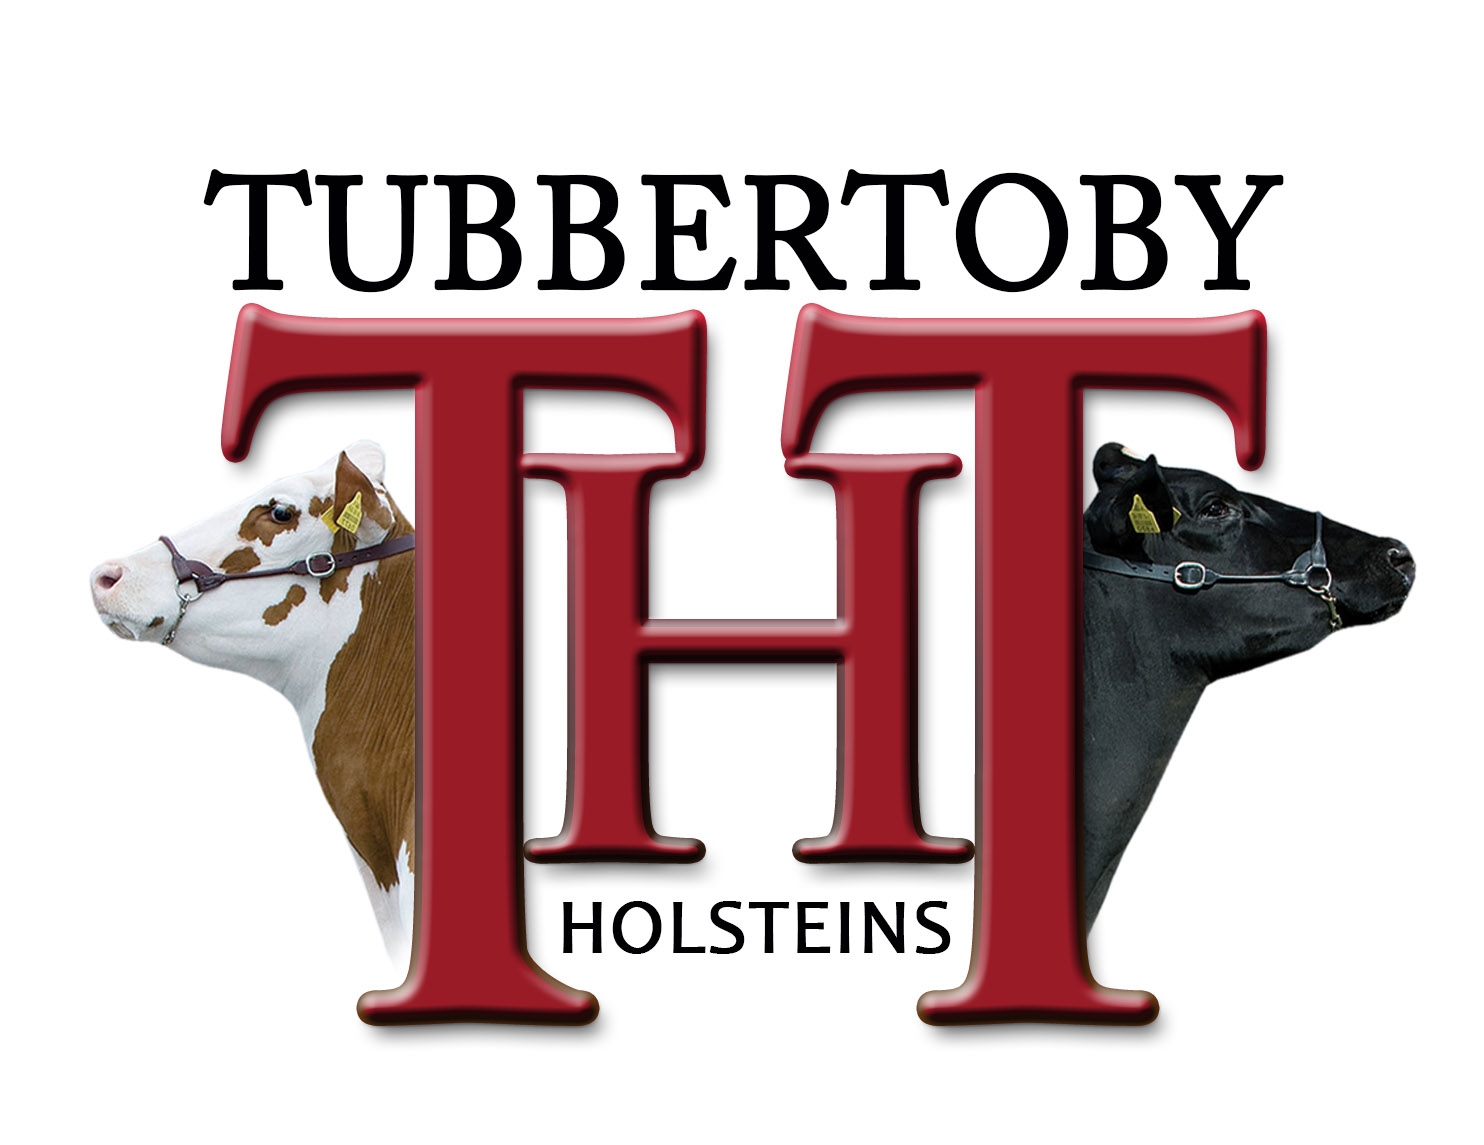 products-tubbertoby_holsteins_logo